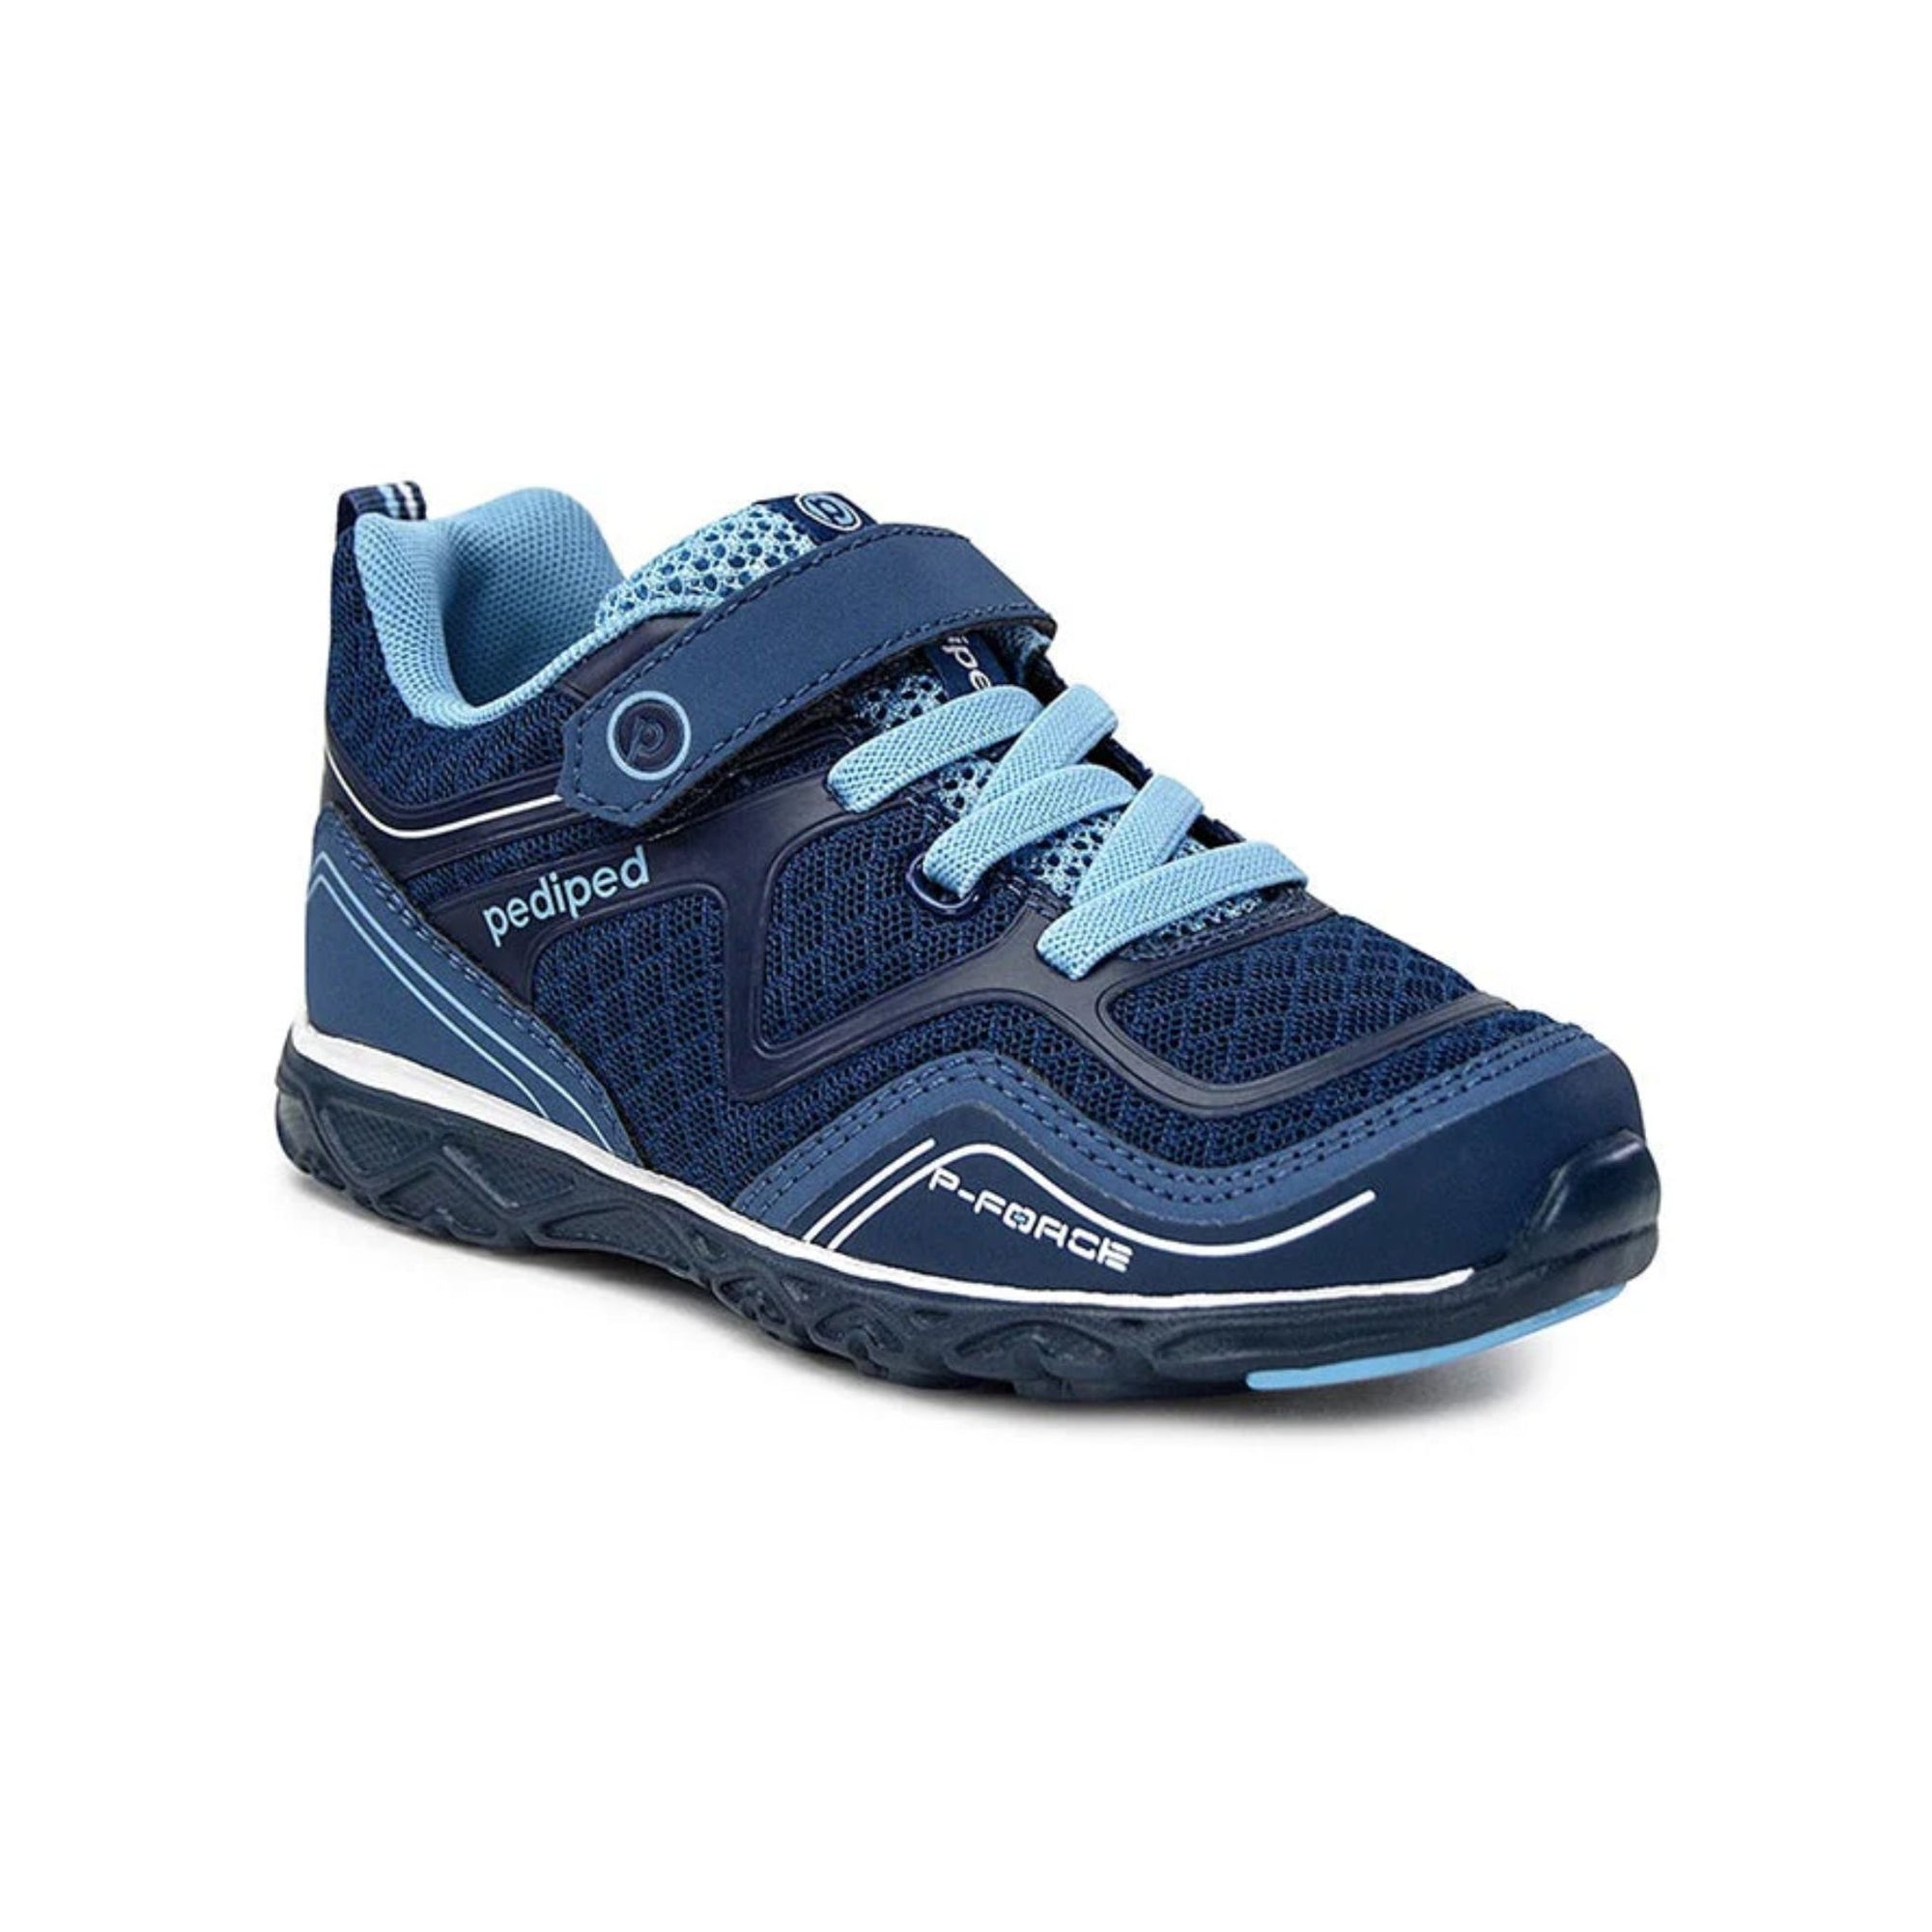 Pediped Flex Force Iceburg Athletic Shoes